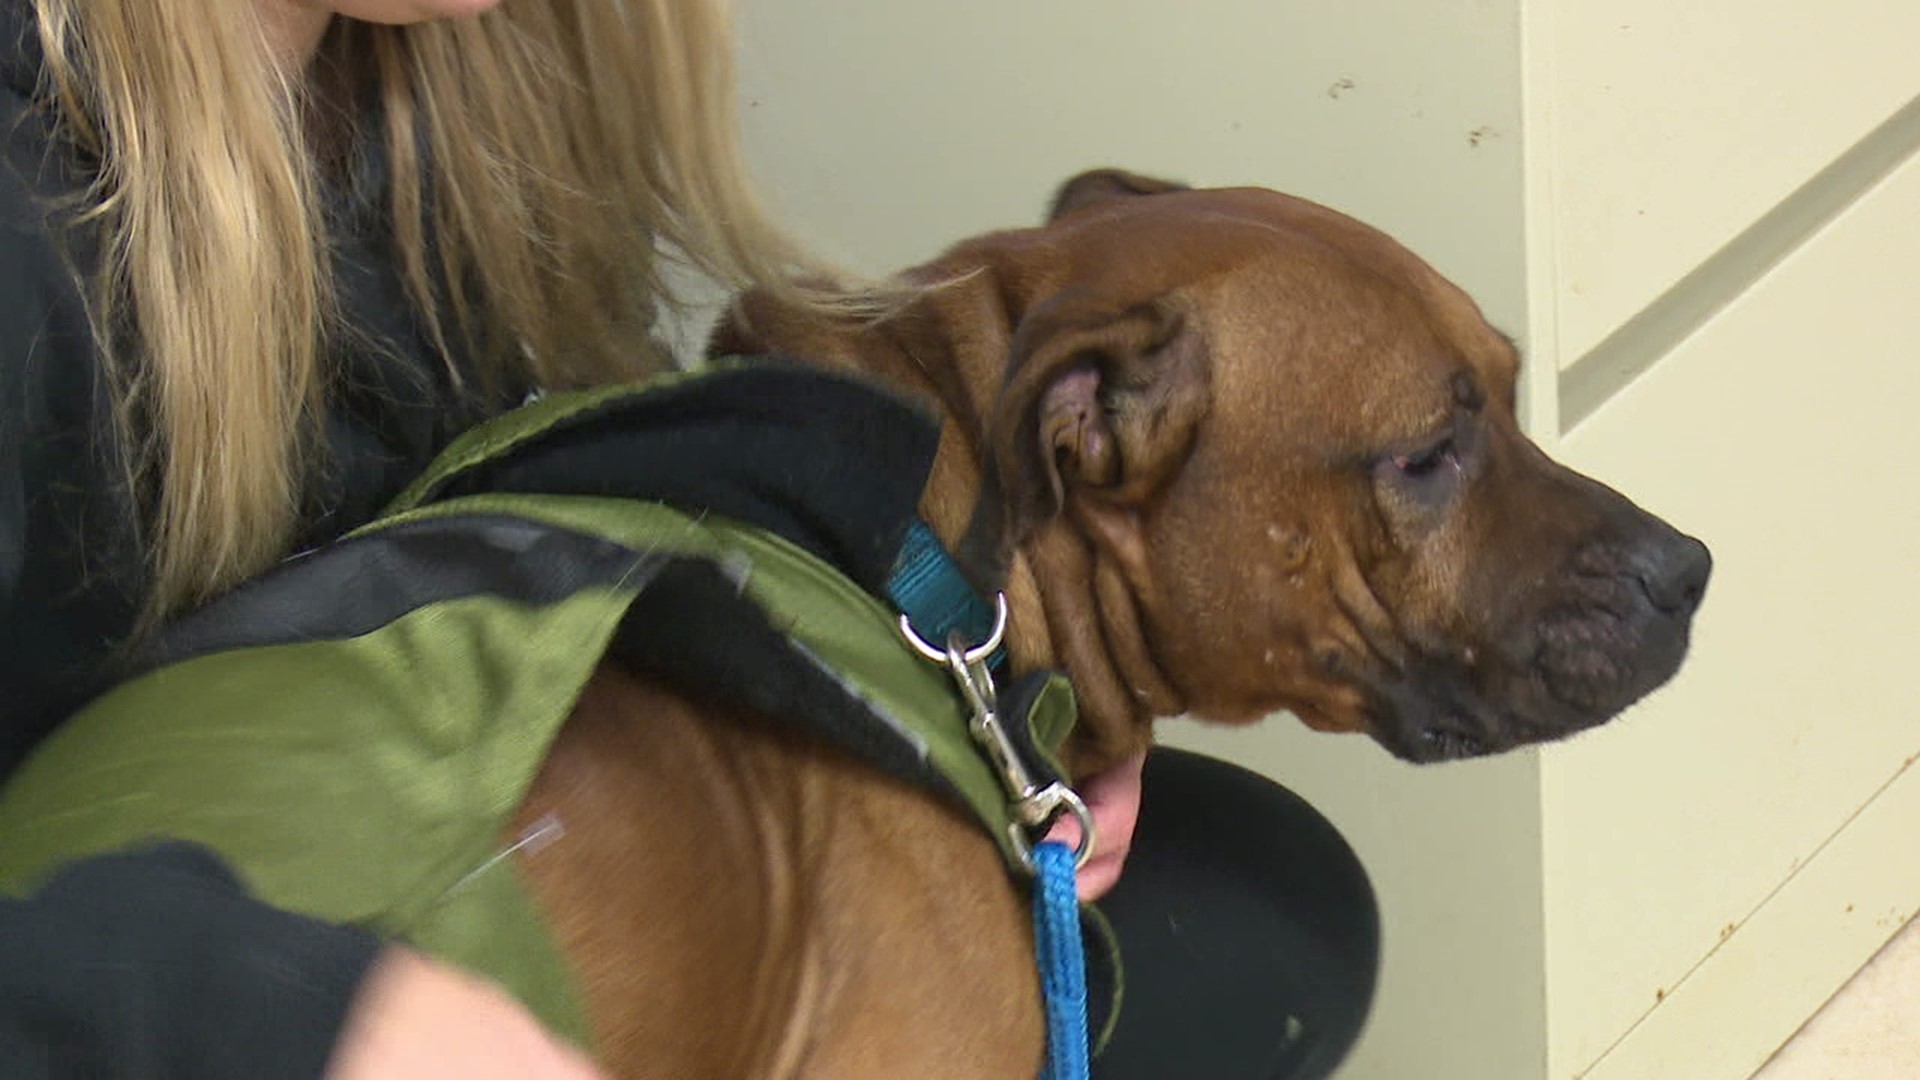 Police are after the person who was spotted throwing a dog out of a car. The animal shelter that rescued him says this is not the first time that happened this week.